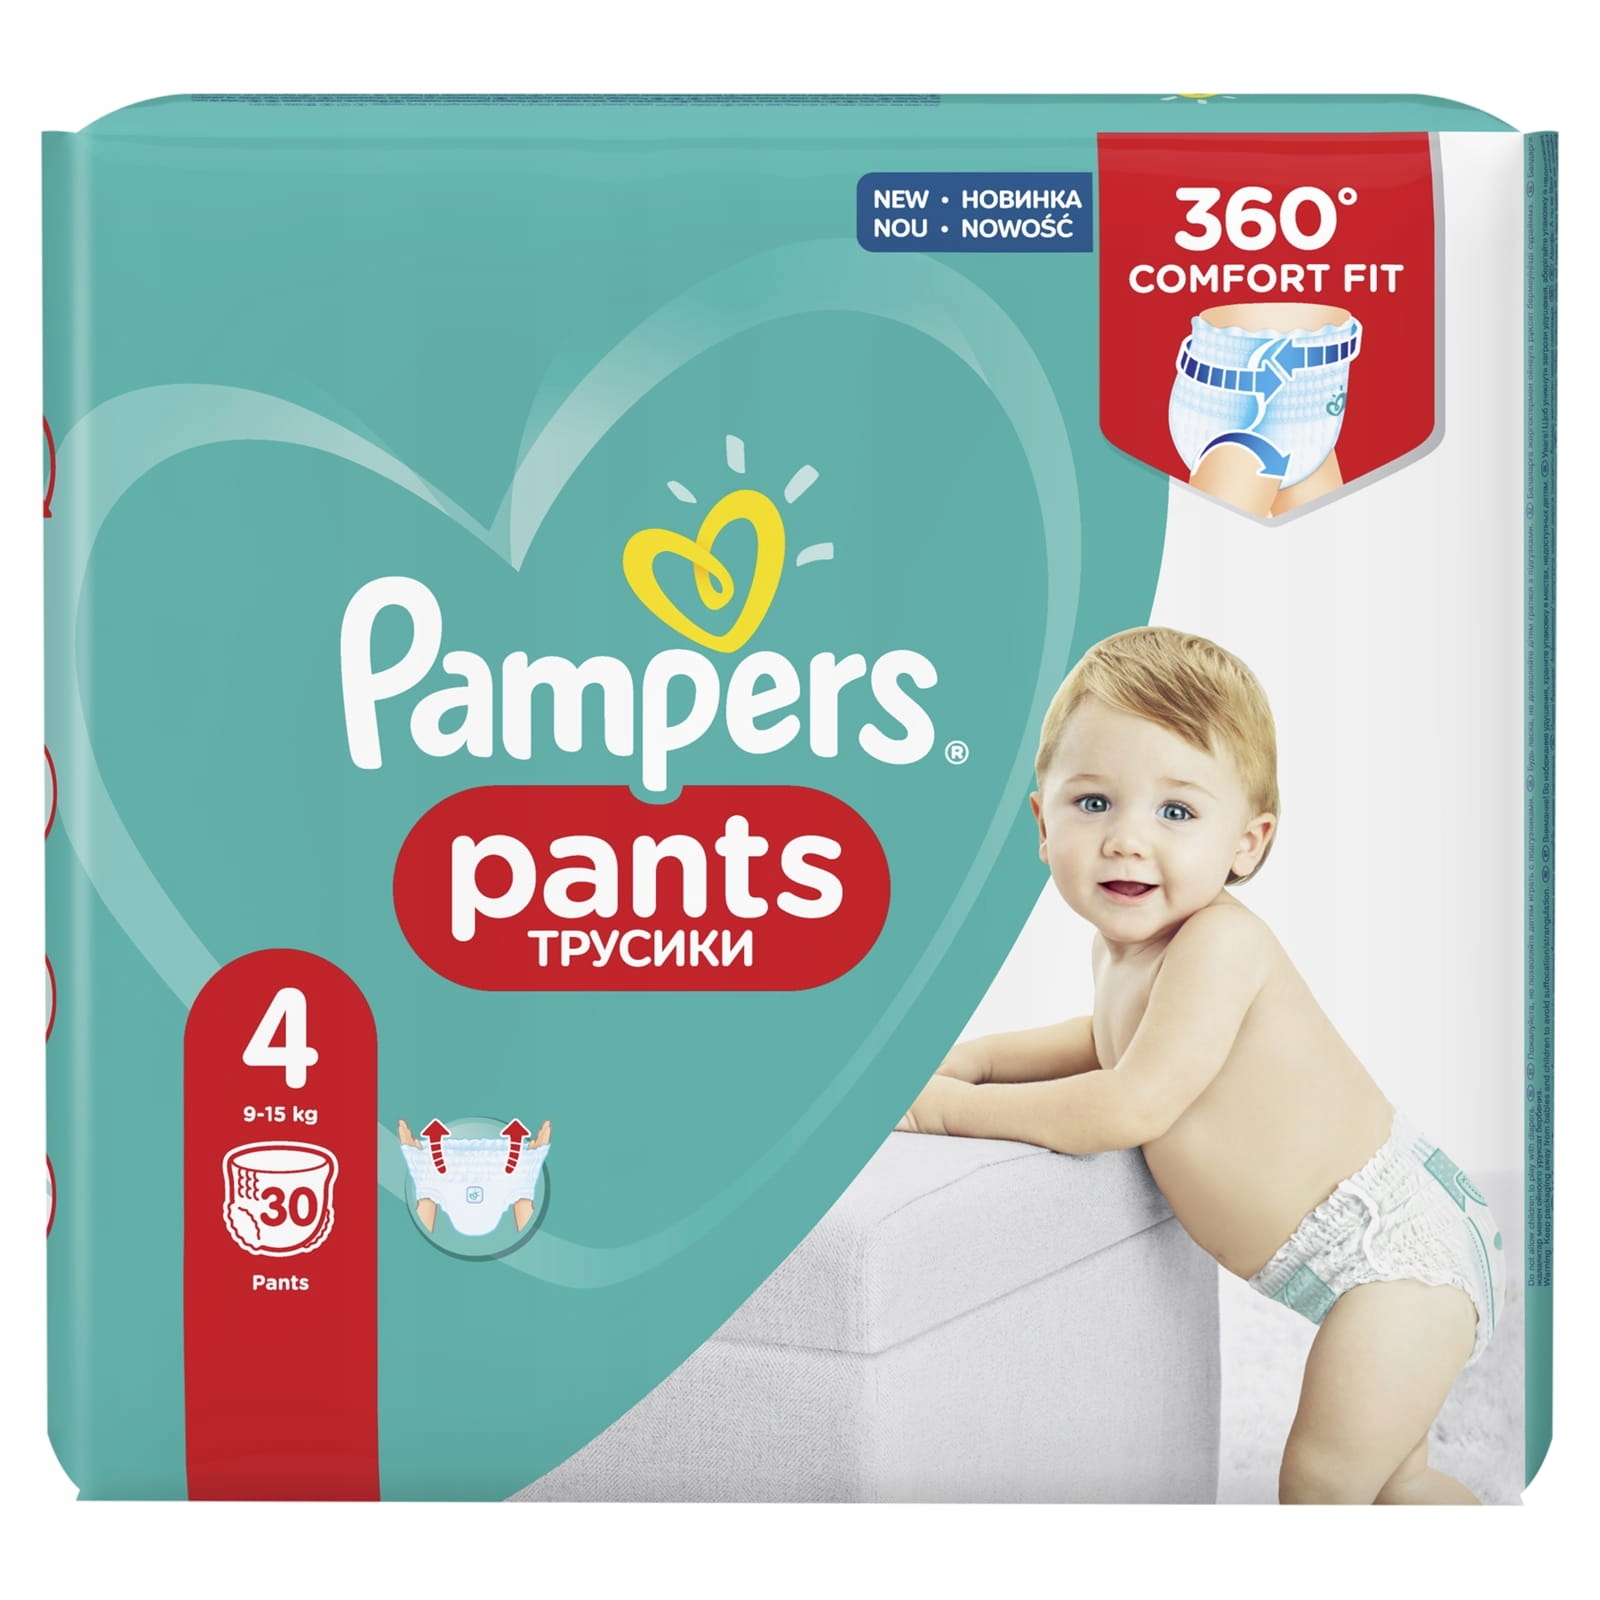 epson pampers